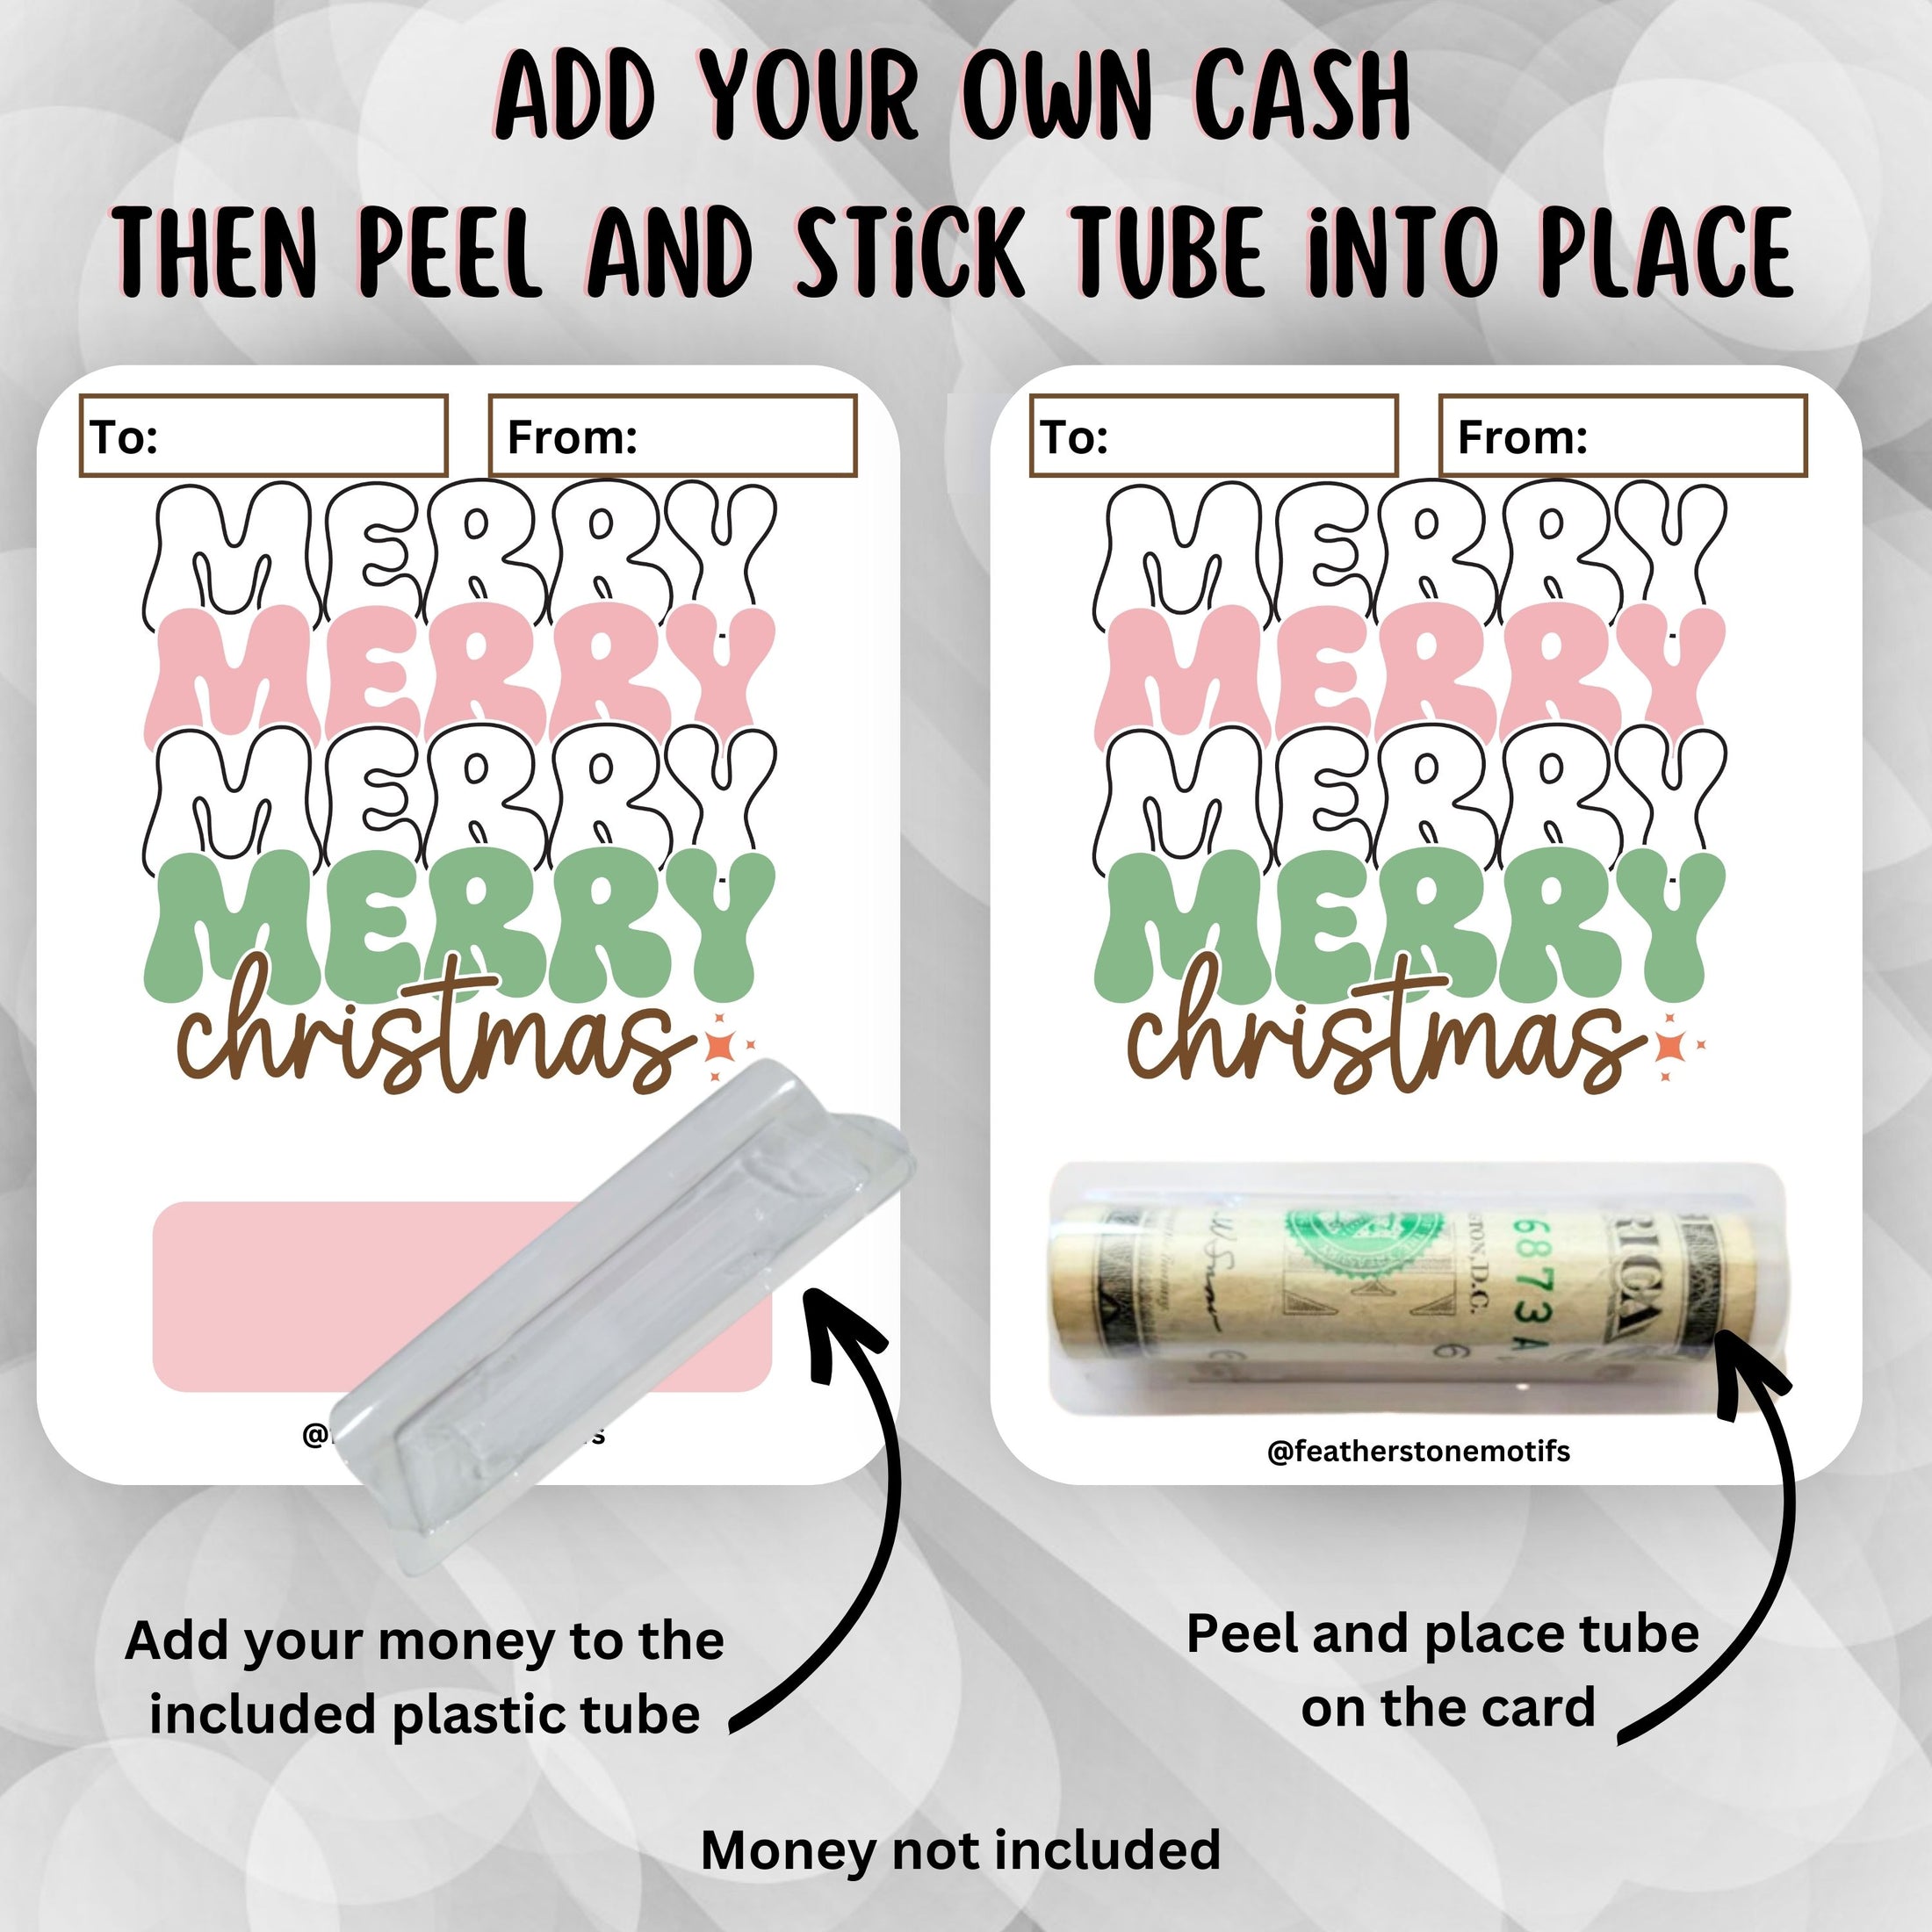 This image shows how to attach the money tube to the Merry Merry money card.